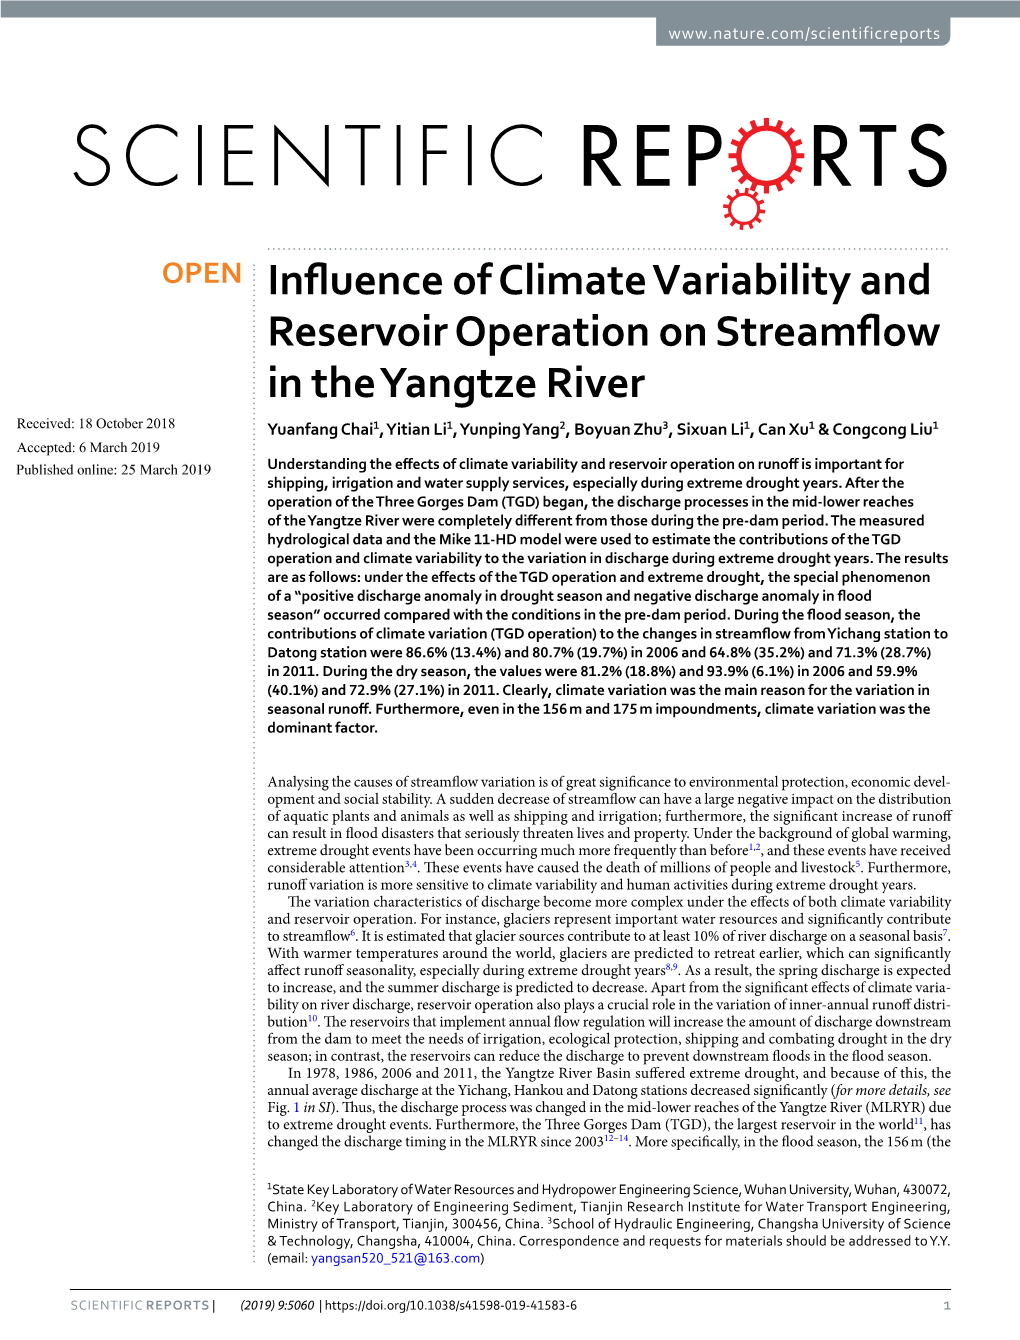 Influence of Climate Variability and Reservoir Operation on Streamflow in the Yangtze River